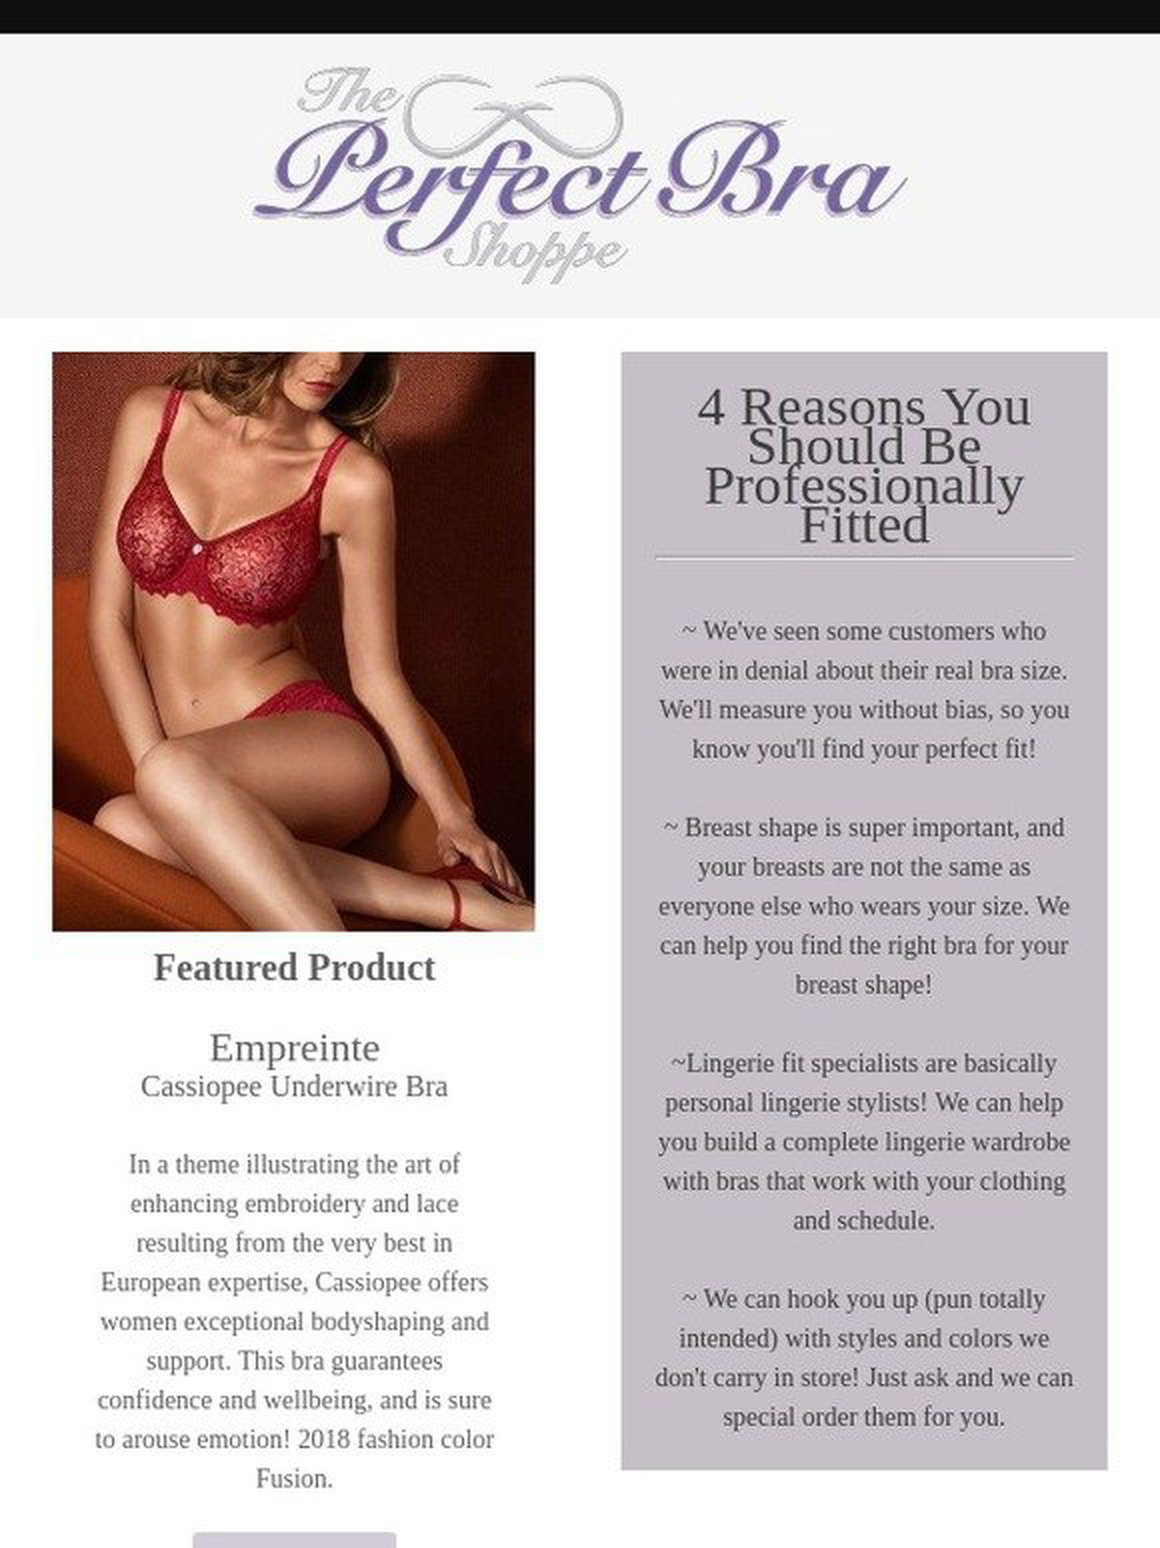 The Perfect Bra Shoppe - Bras, Lingerie and Swimwear: Love your